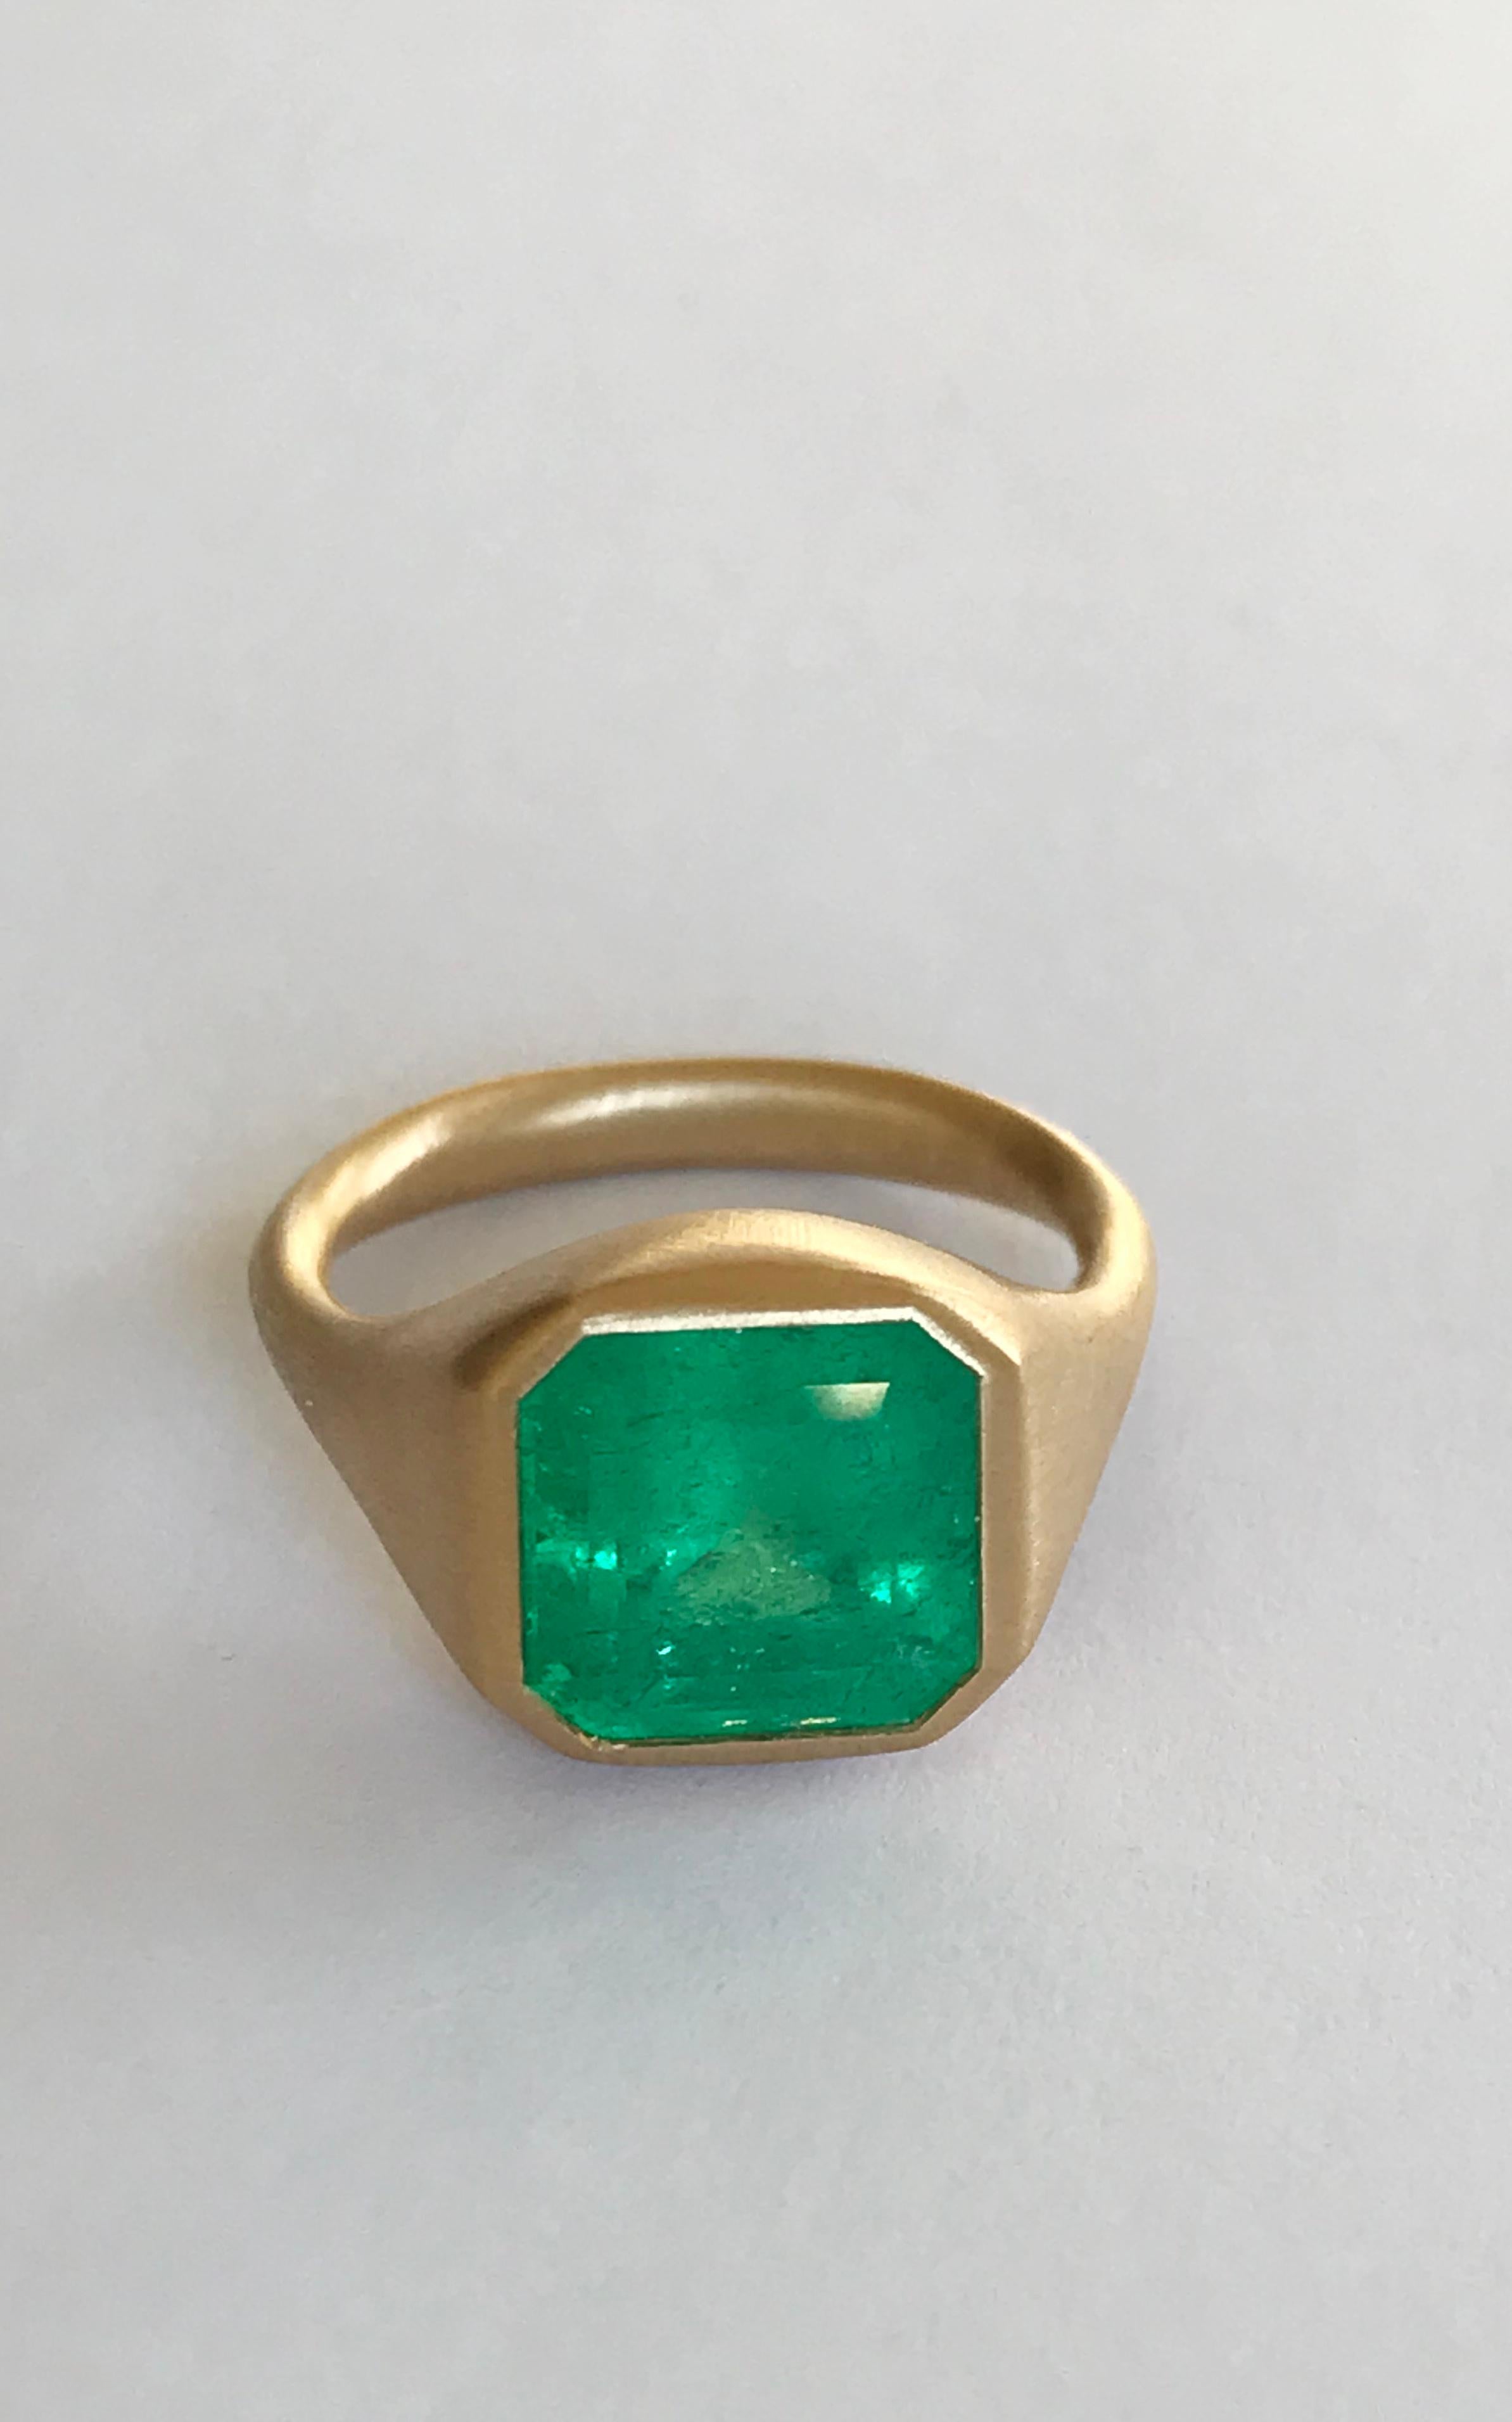 Dalben 4, 12 Carat Colombian Emerald Yellow Gold Ring For Sale 2